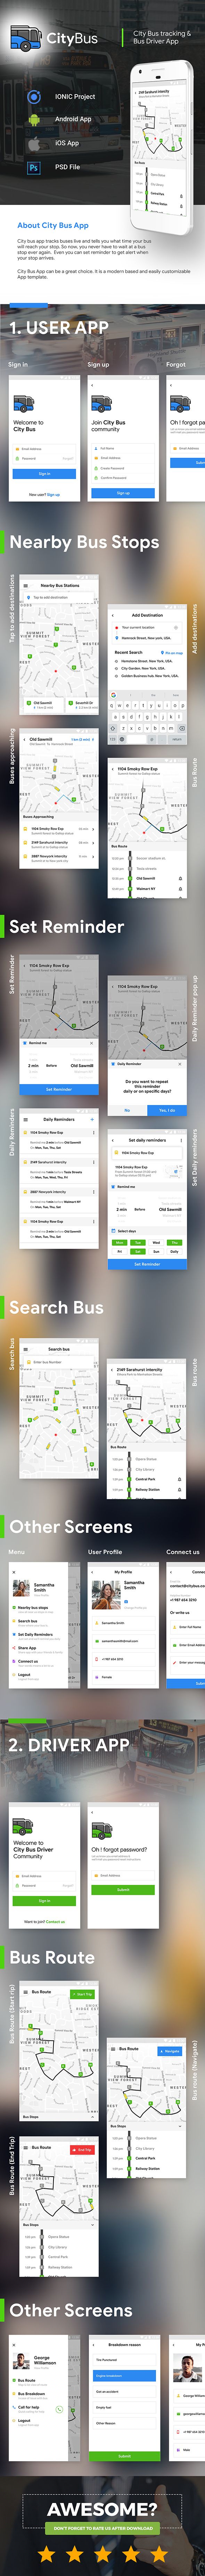 City Bus Tracking App with Driver App (Android App Template & iOS App Template) (HTML+CSS | IONIC 5) - 2